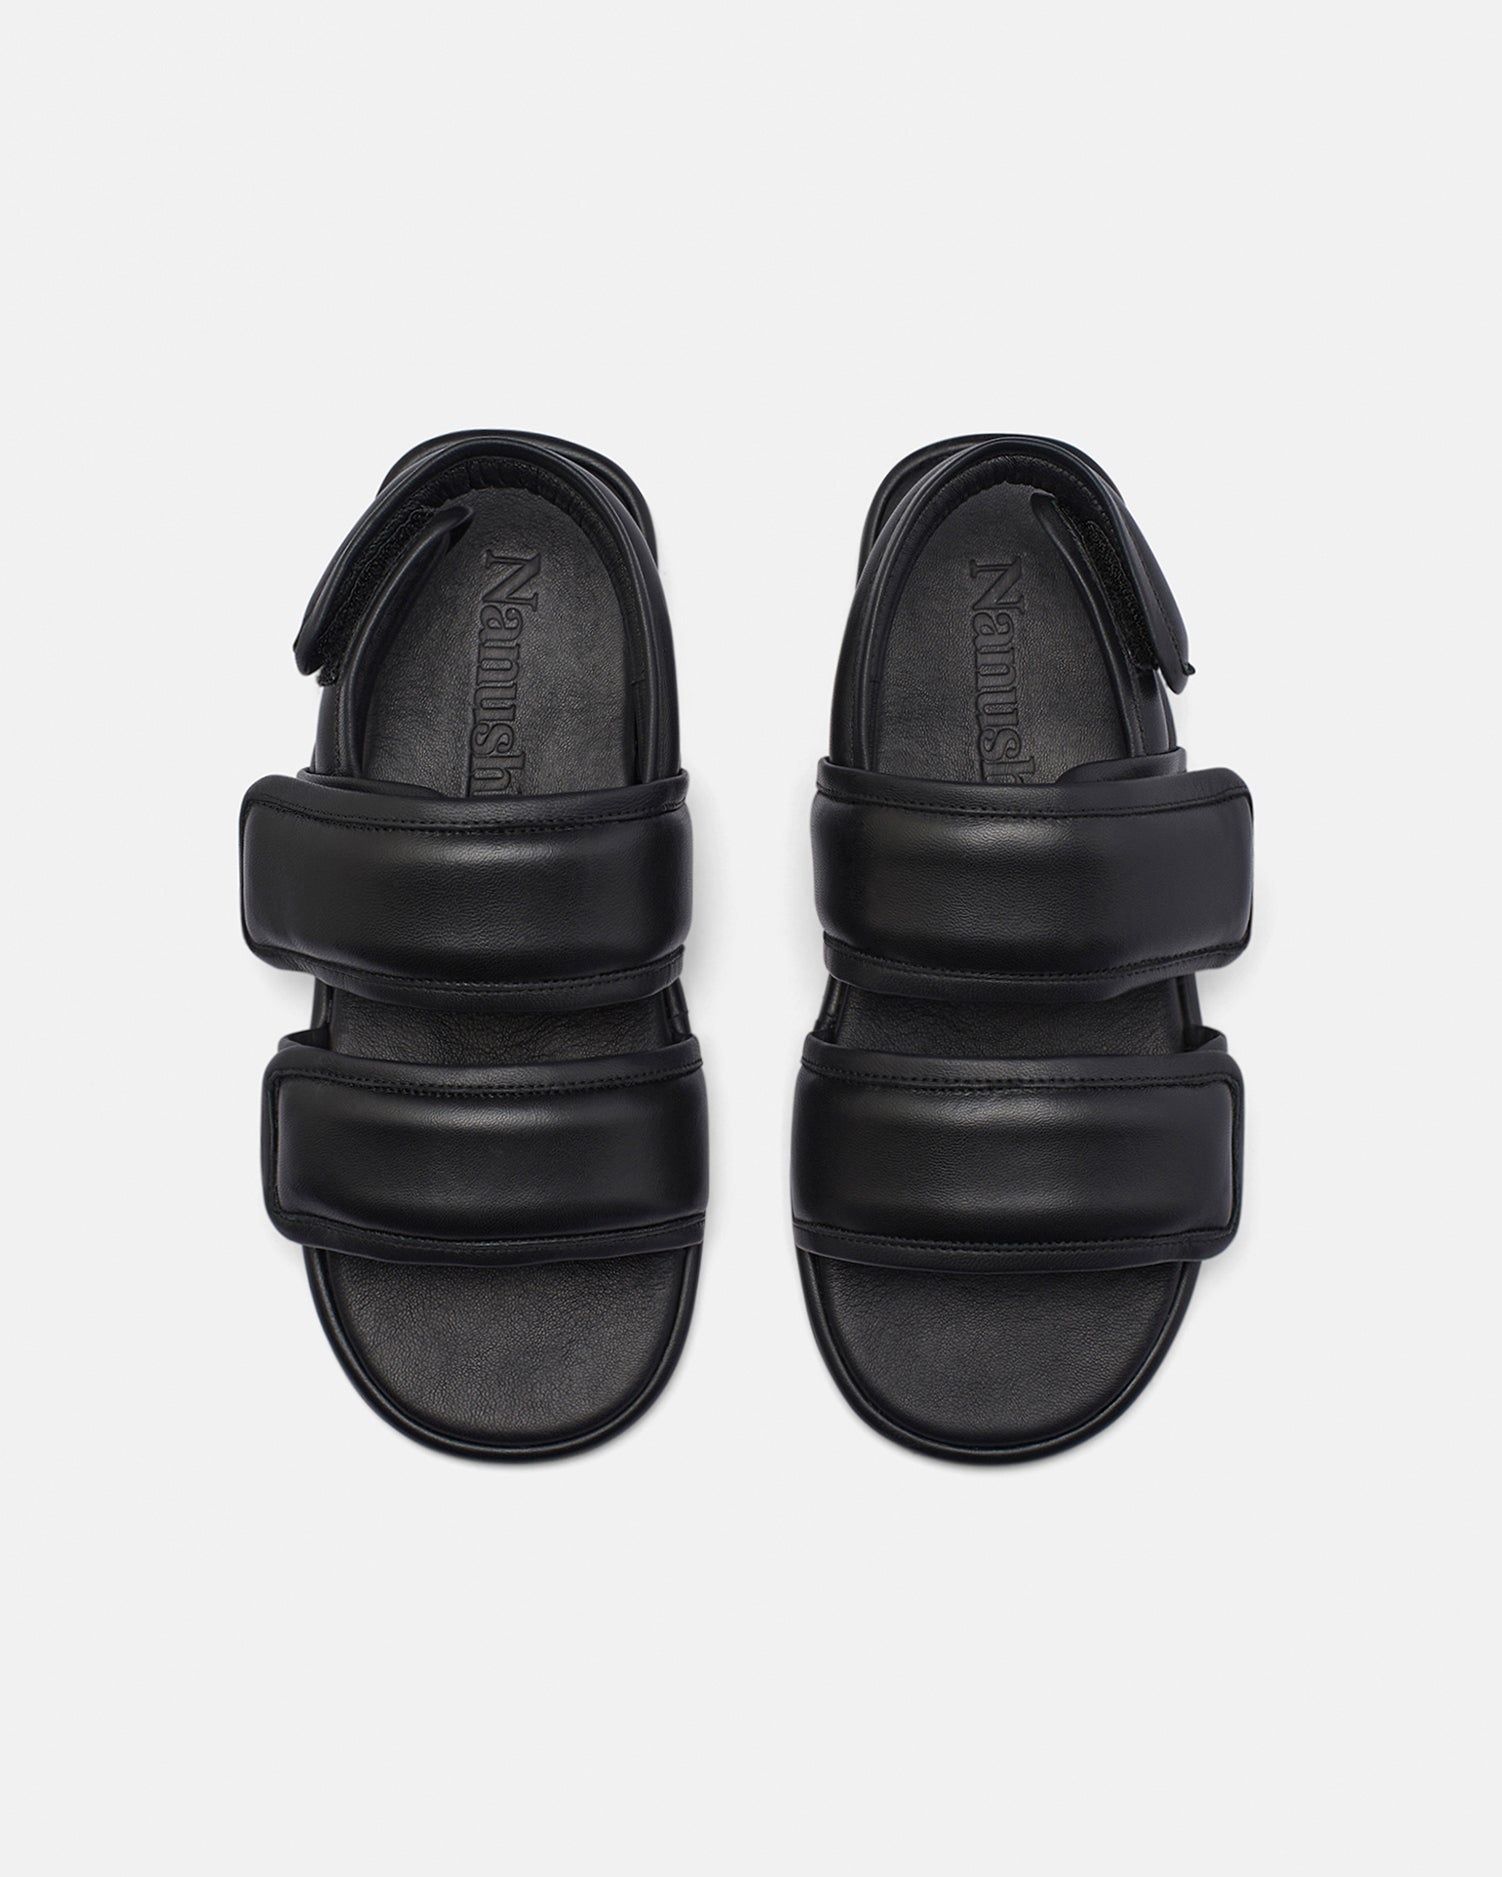 Rounded Toe Padded Flat Sandals - 2